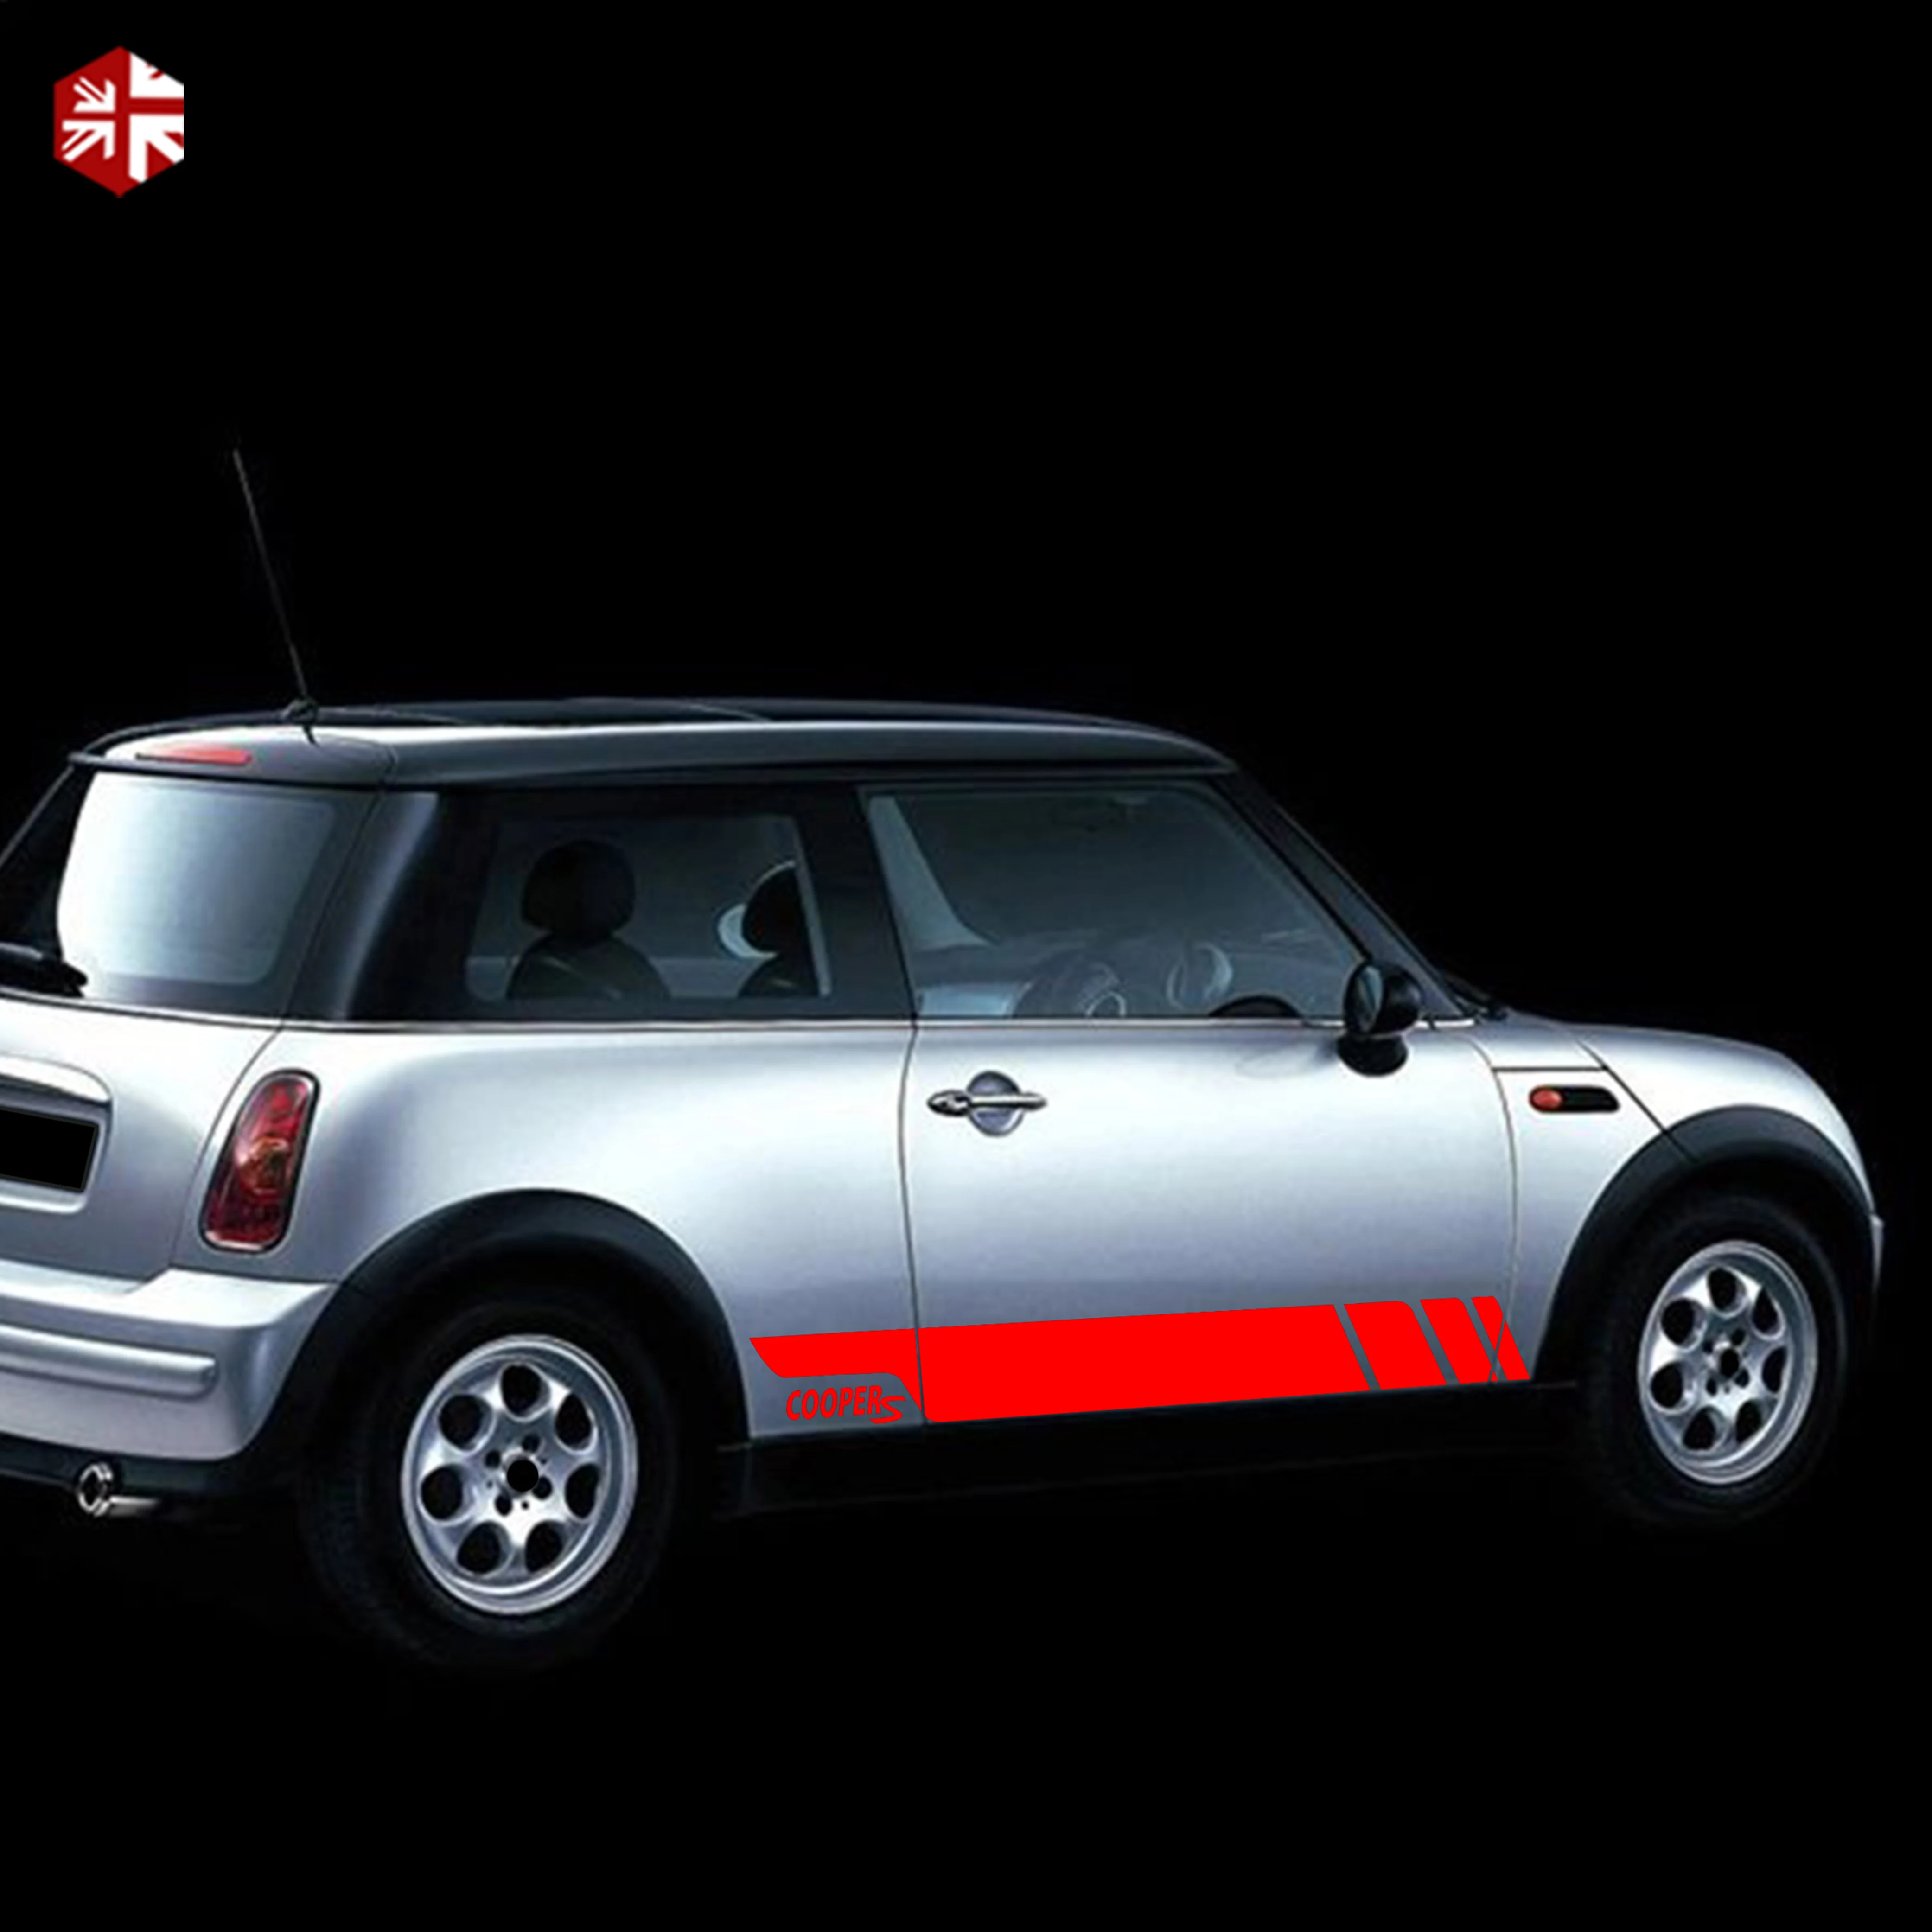 2 Pcs Car Styling Cooper S Graphics Vinyl Decal Racing Door Side Stripes  Sticker For MINI Cooper S R50 R52 R53 One Accessories